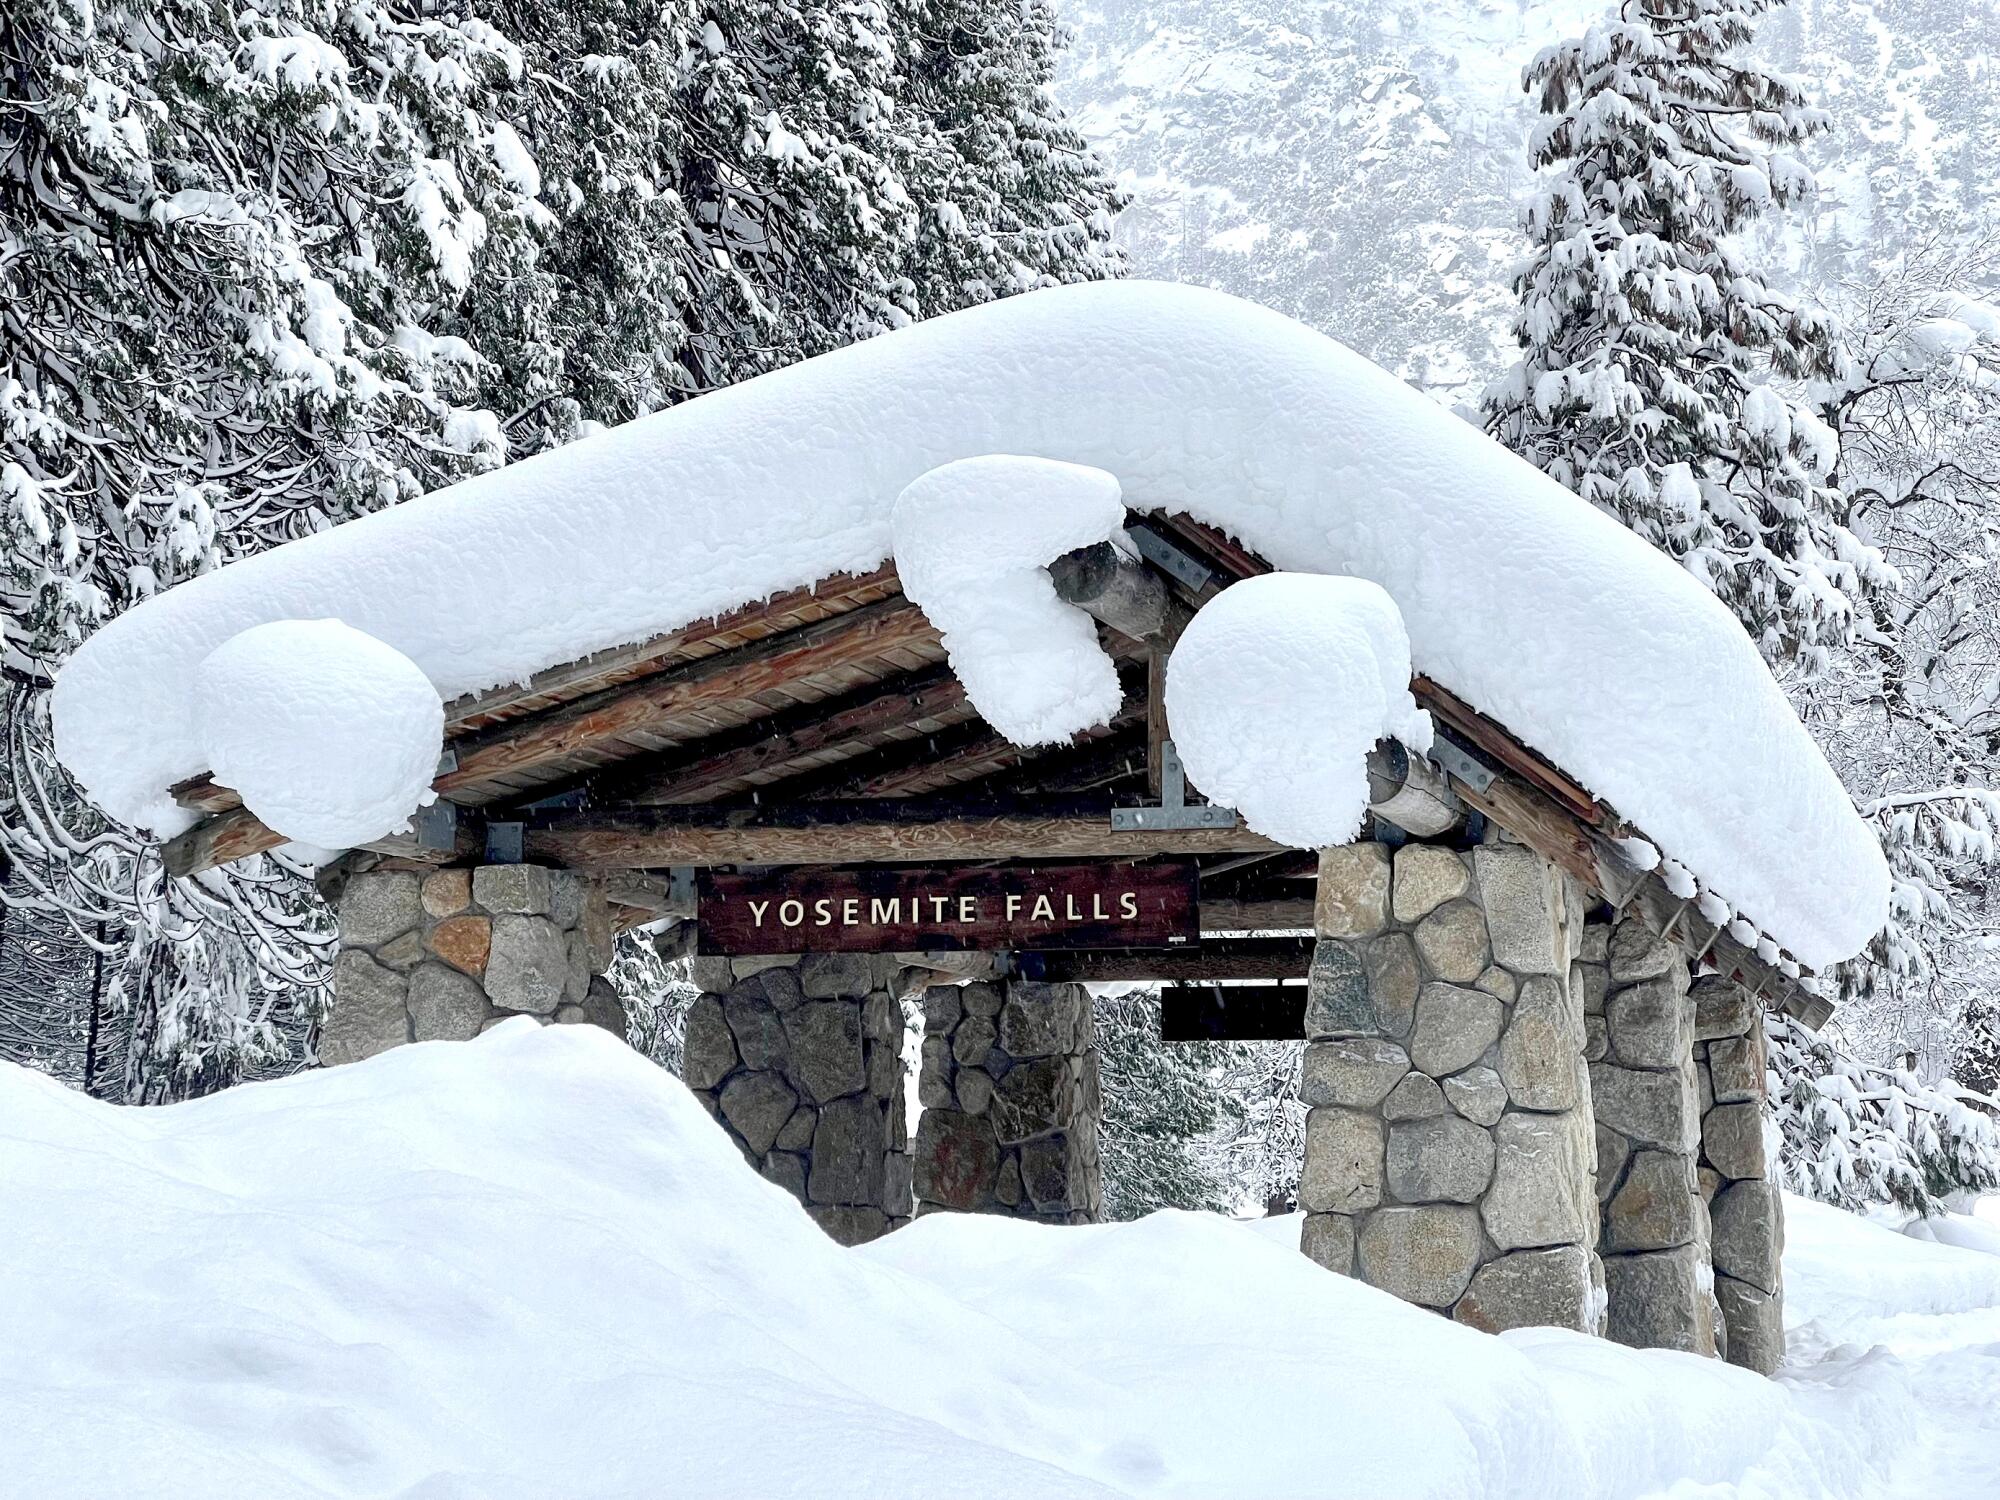 Yosemite National Park has experienced significant snowfall in all areas of the park